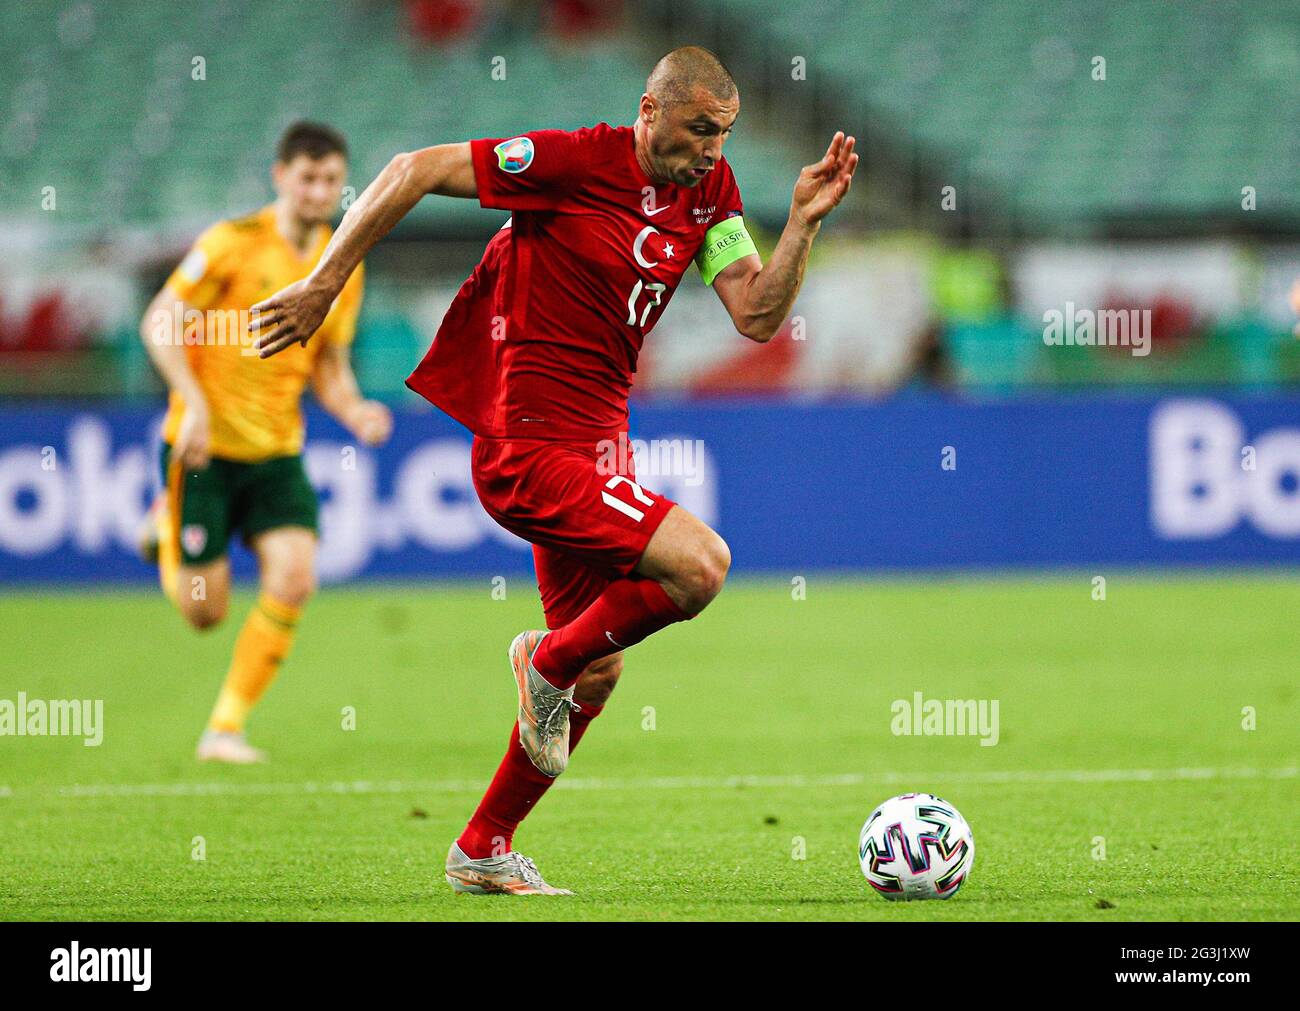 Burak Yilmaz of Turkey during the UEFA Euro 2020 Group A match at the Baku Olympic Stadium in Azerbaijan. Picture date: Wednesday June 16, 2021. Stock Photo